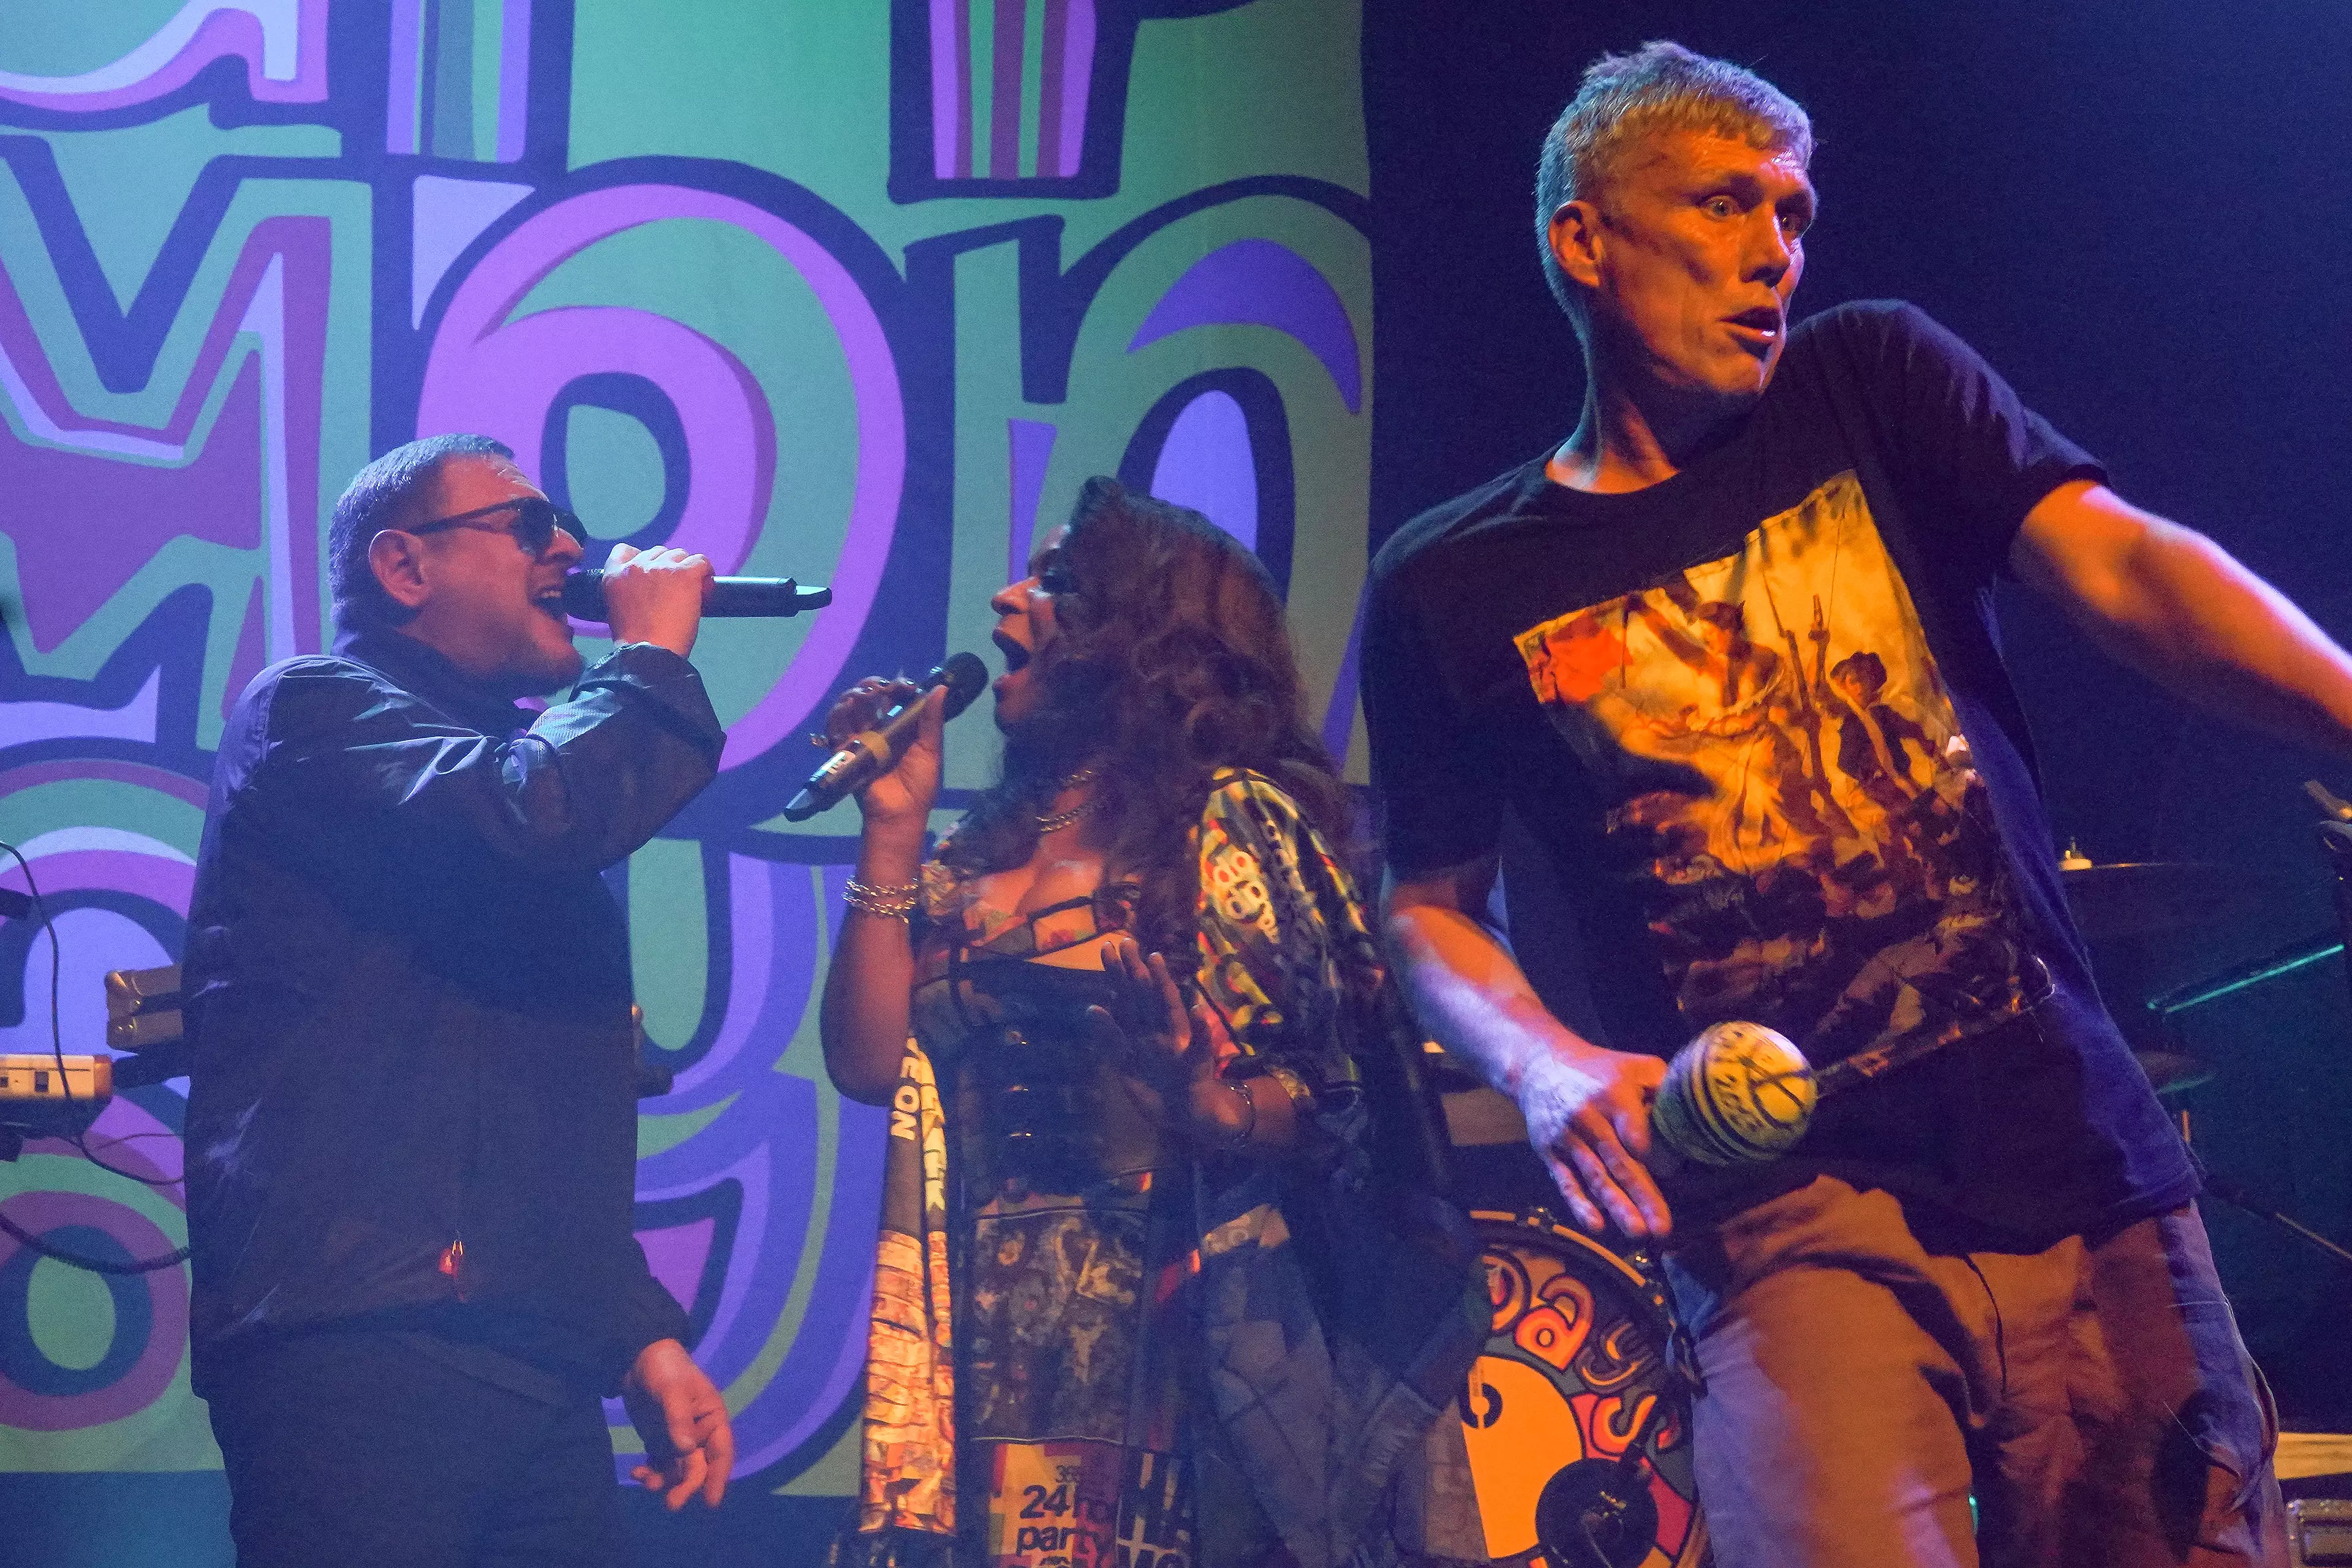 Shaun Ryder (left) performing with The Happy Mondays.